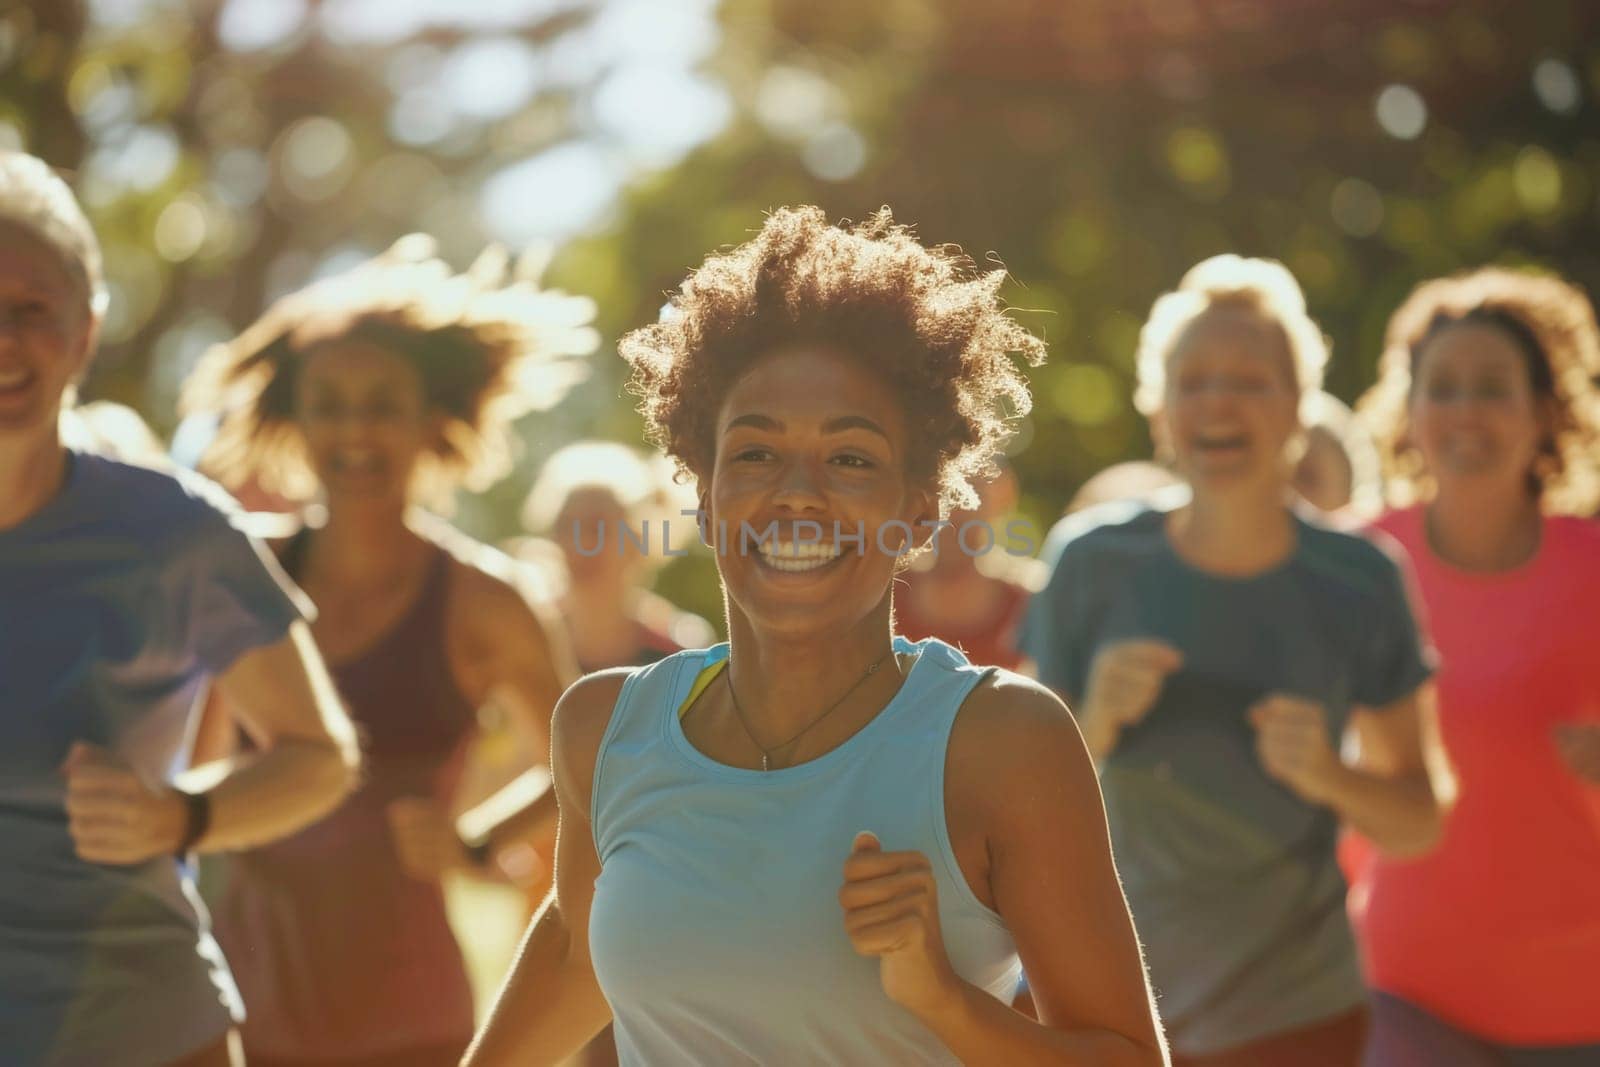 A diverse group of people are jogging in a sunlit park, with a focus on a joyful woman leading the pack. Their smiles and active postures exude health and community spirit.